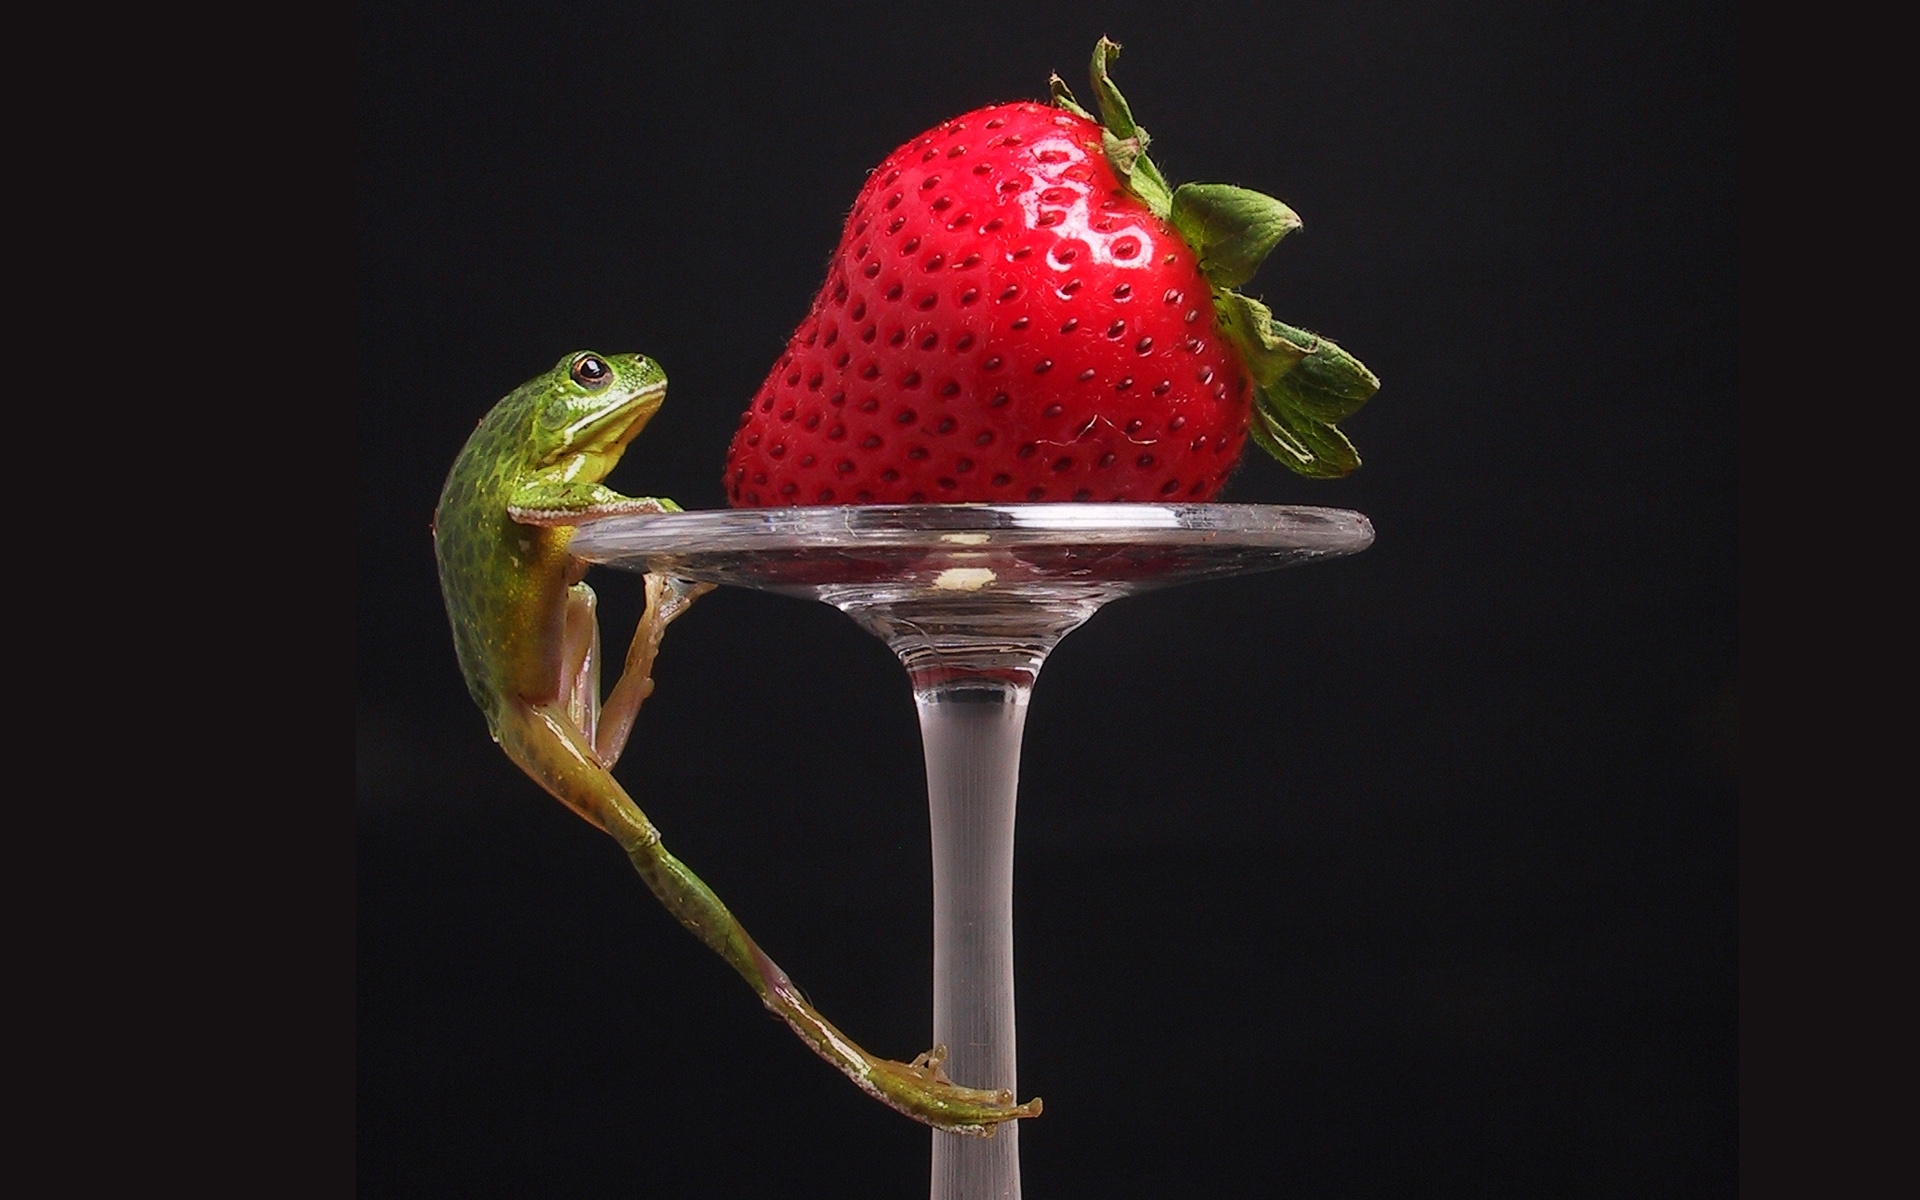 fruits, animals, food, strawberry, frogs, berries, black